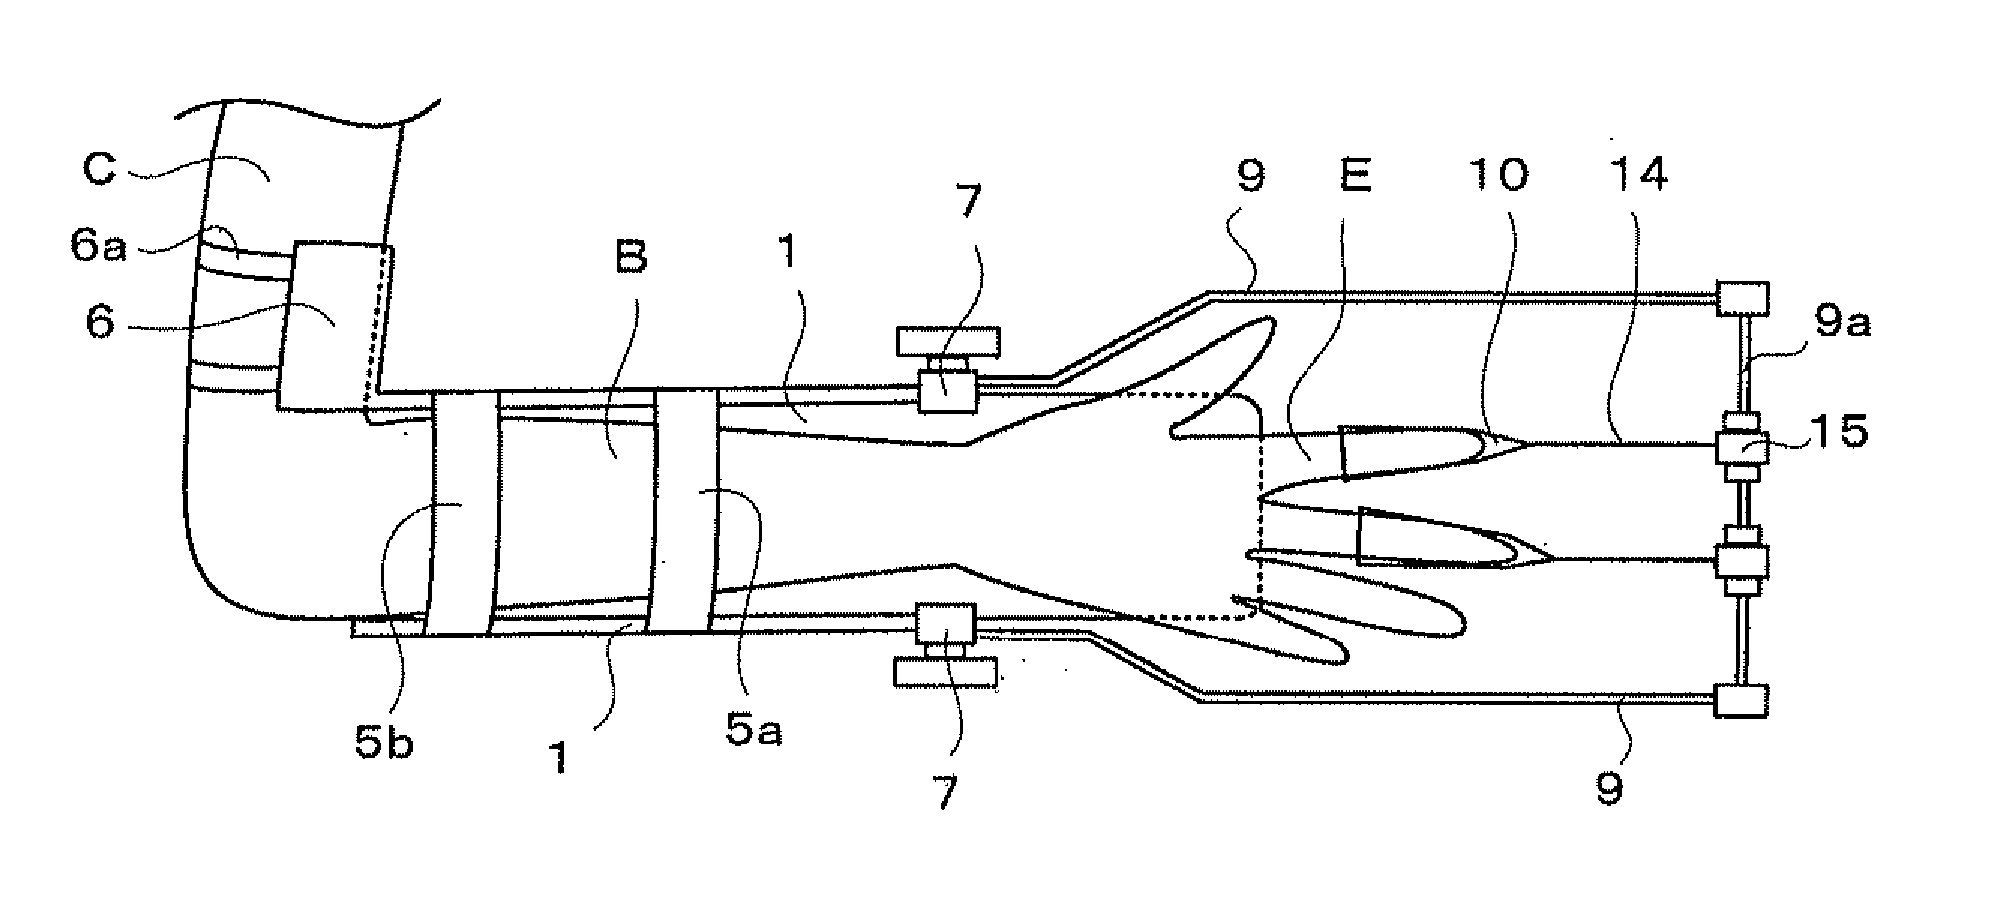 Portable or wearable fracture treatment device